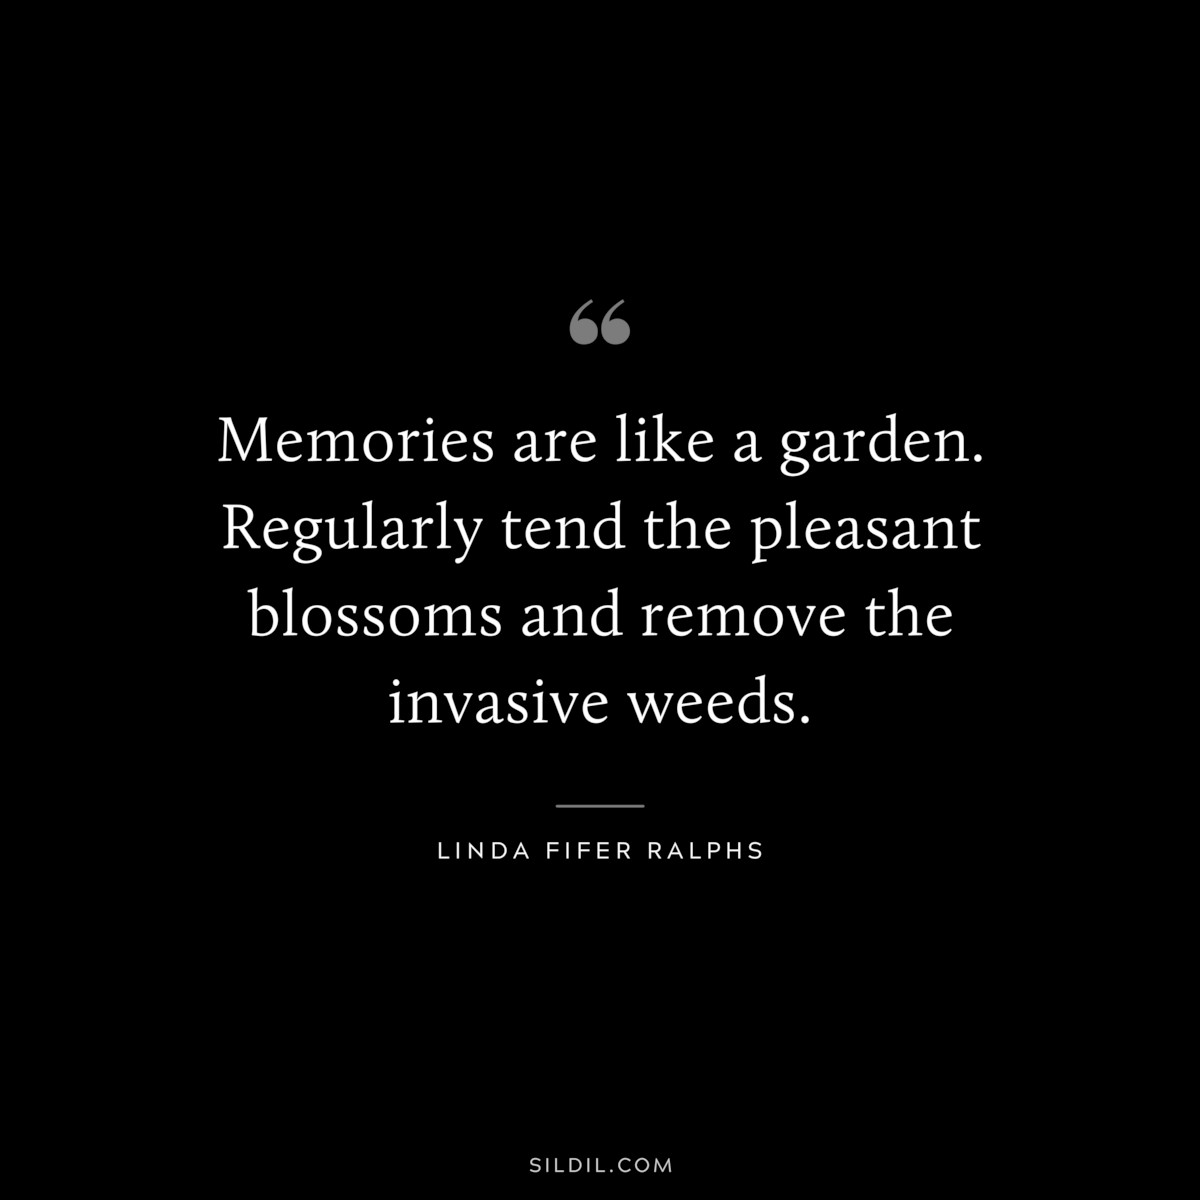 Memories are like a garden. Regularly tend the pleasant blossoms and remove the invasive weeds. ― Linda Fifer Ralphs